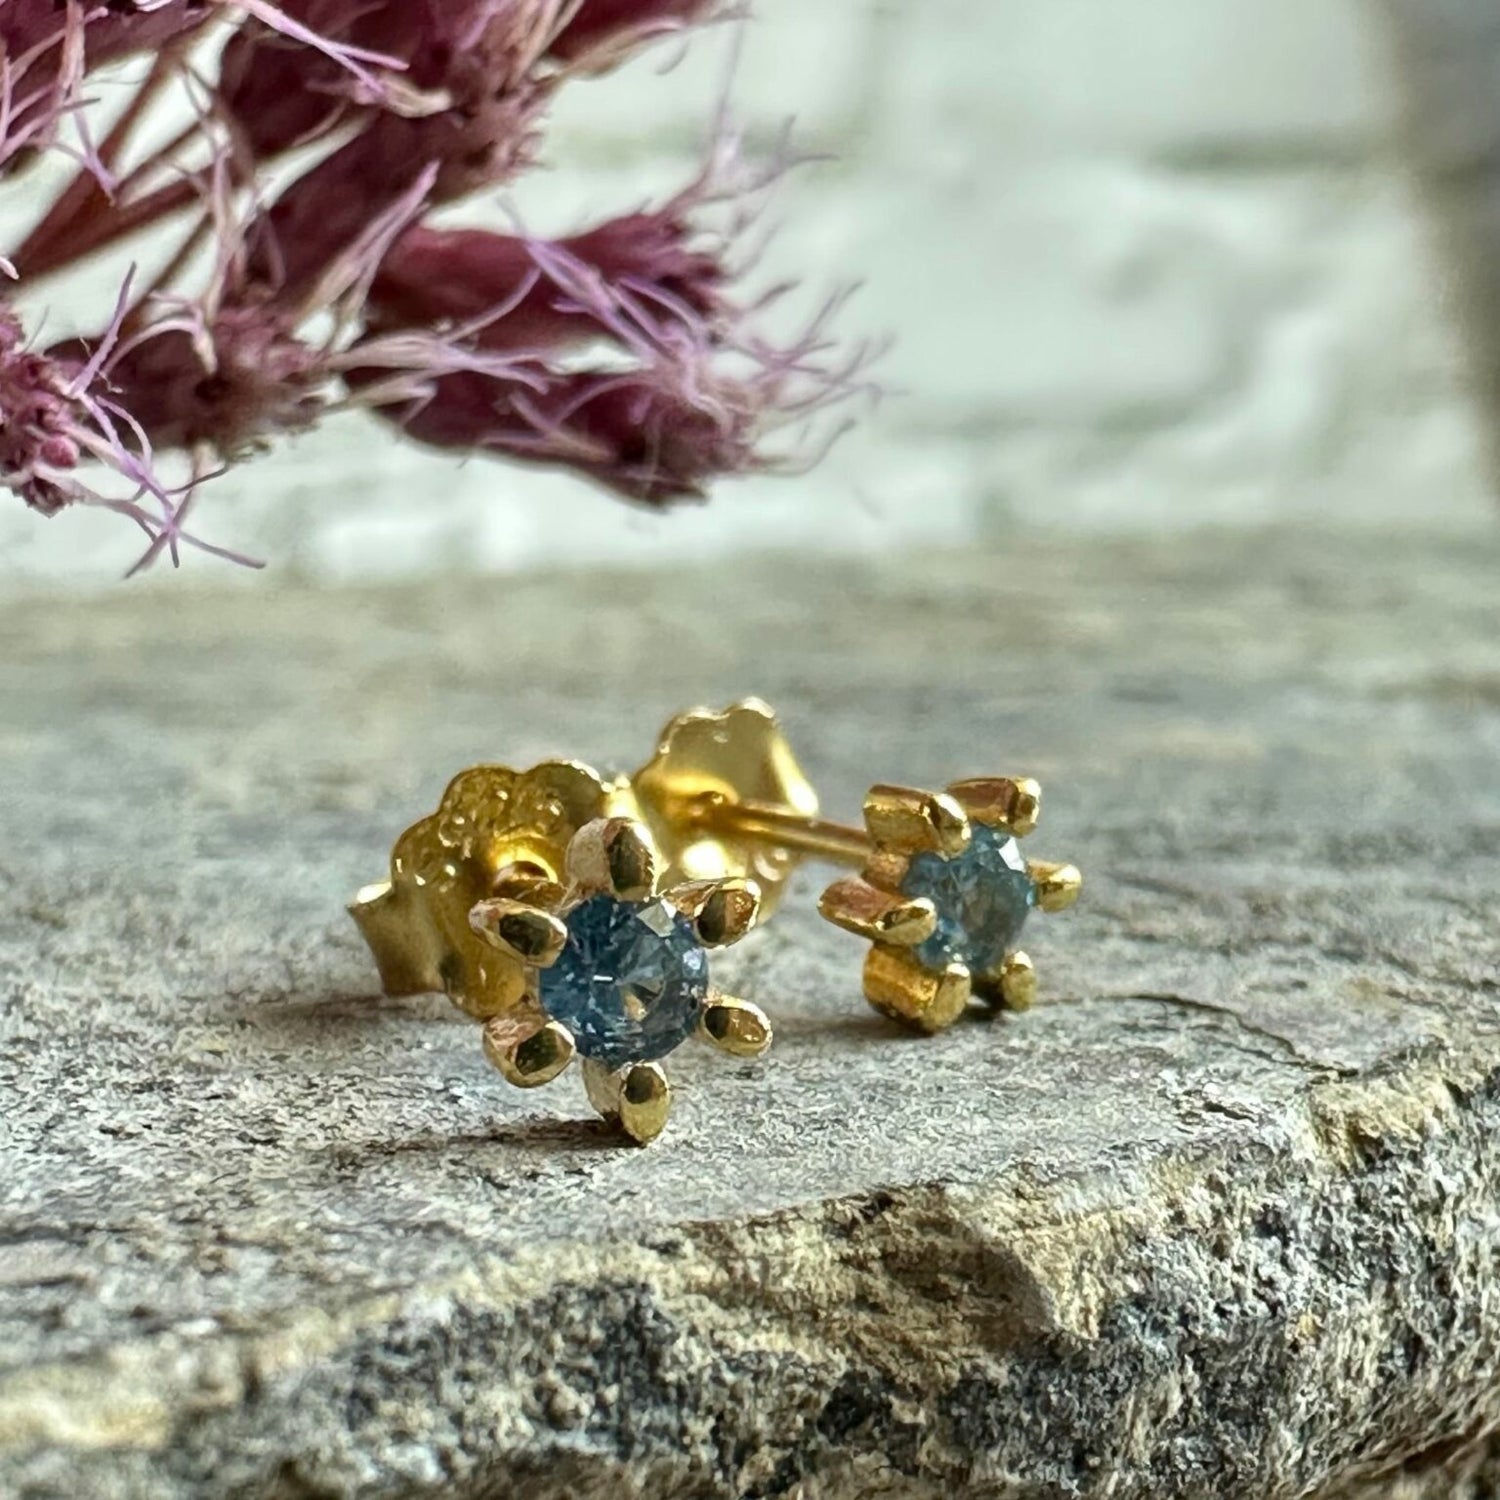 EVE - Stud Earrings - Sterling Silver - Gold Plated - Sapphire CZ